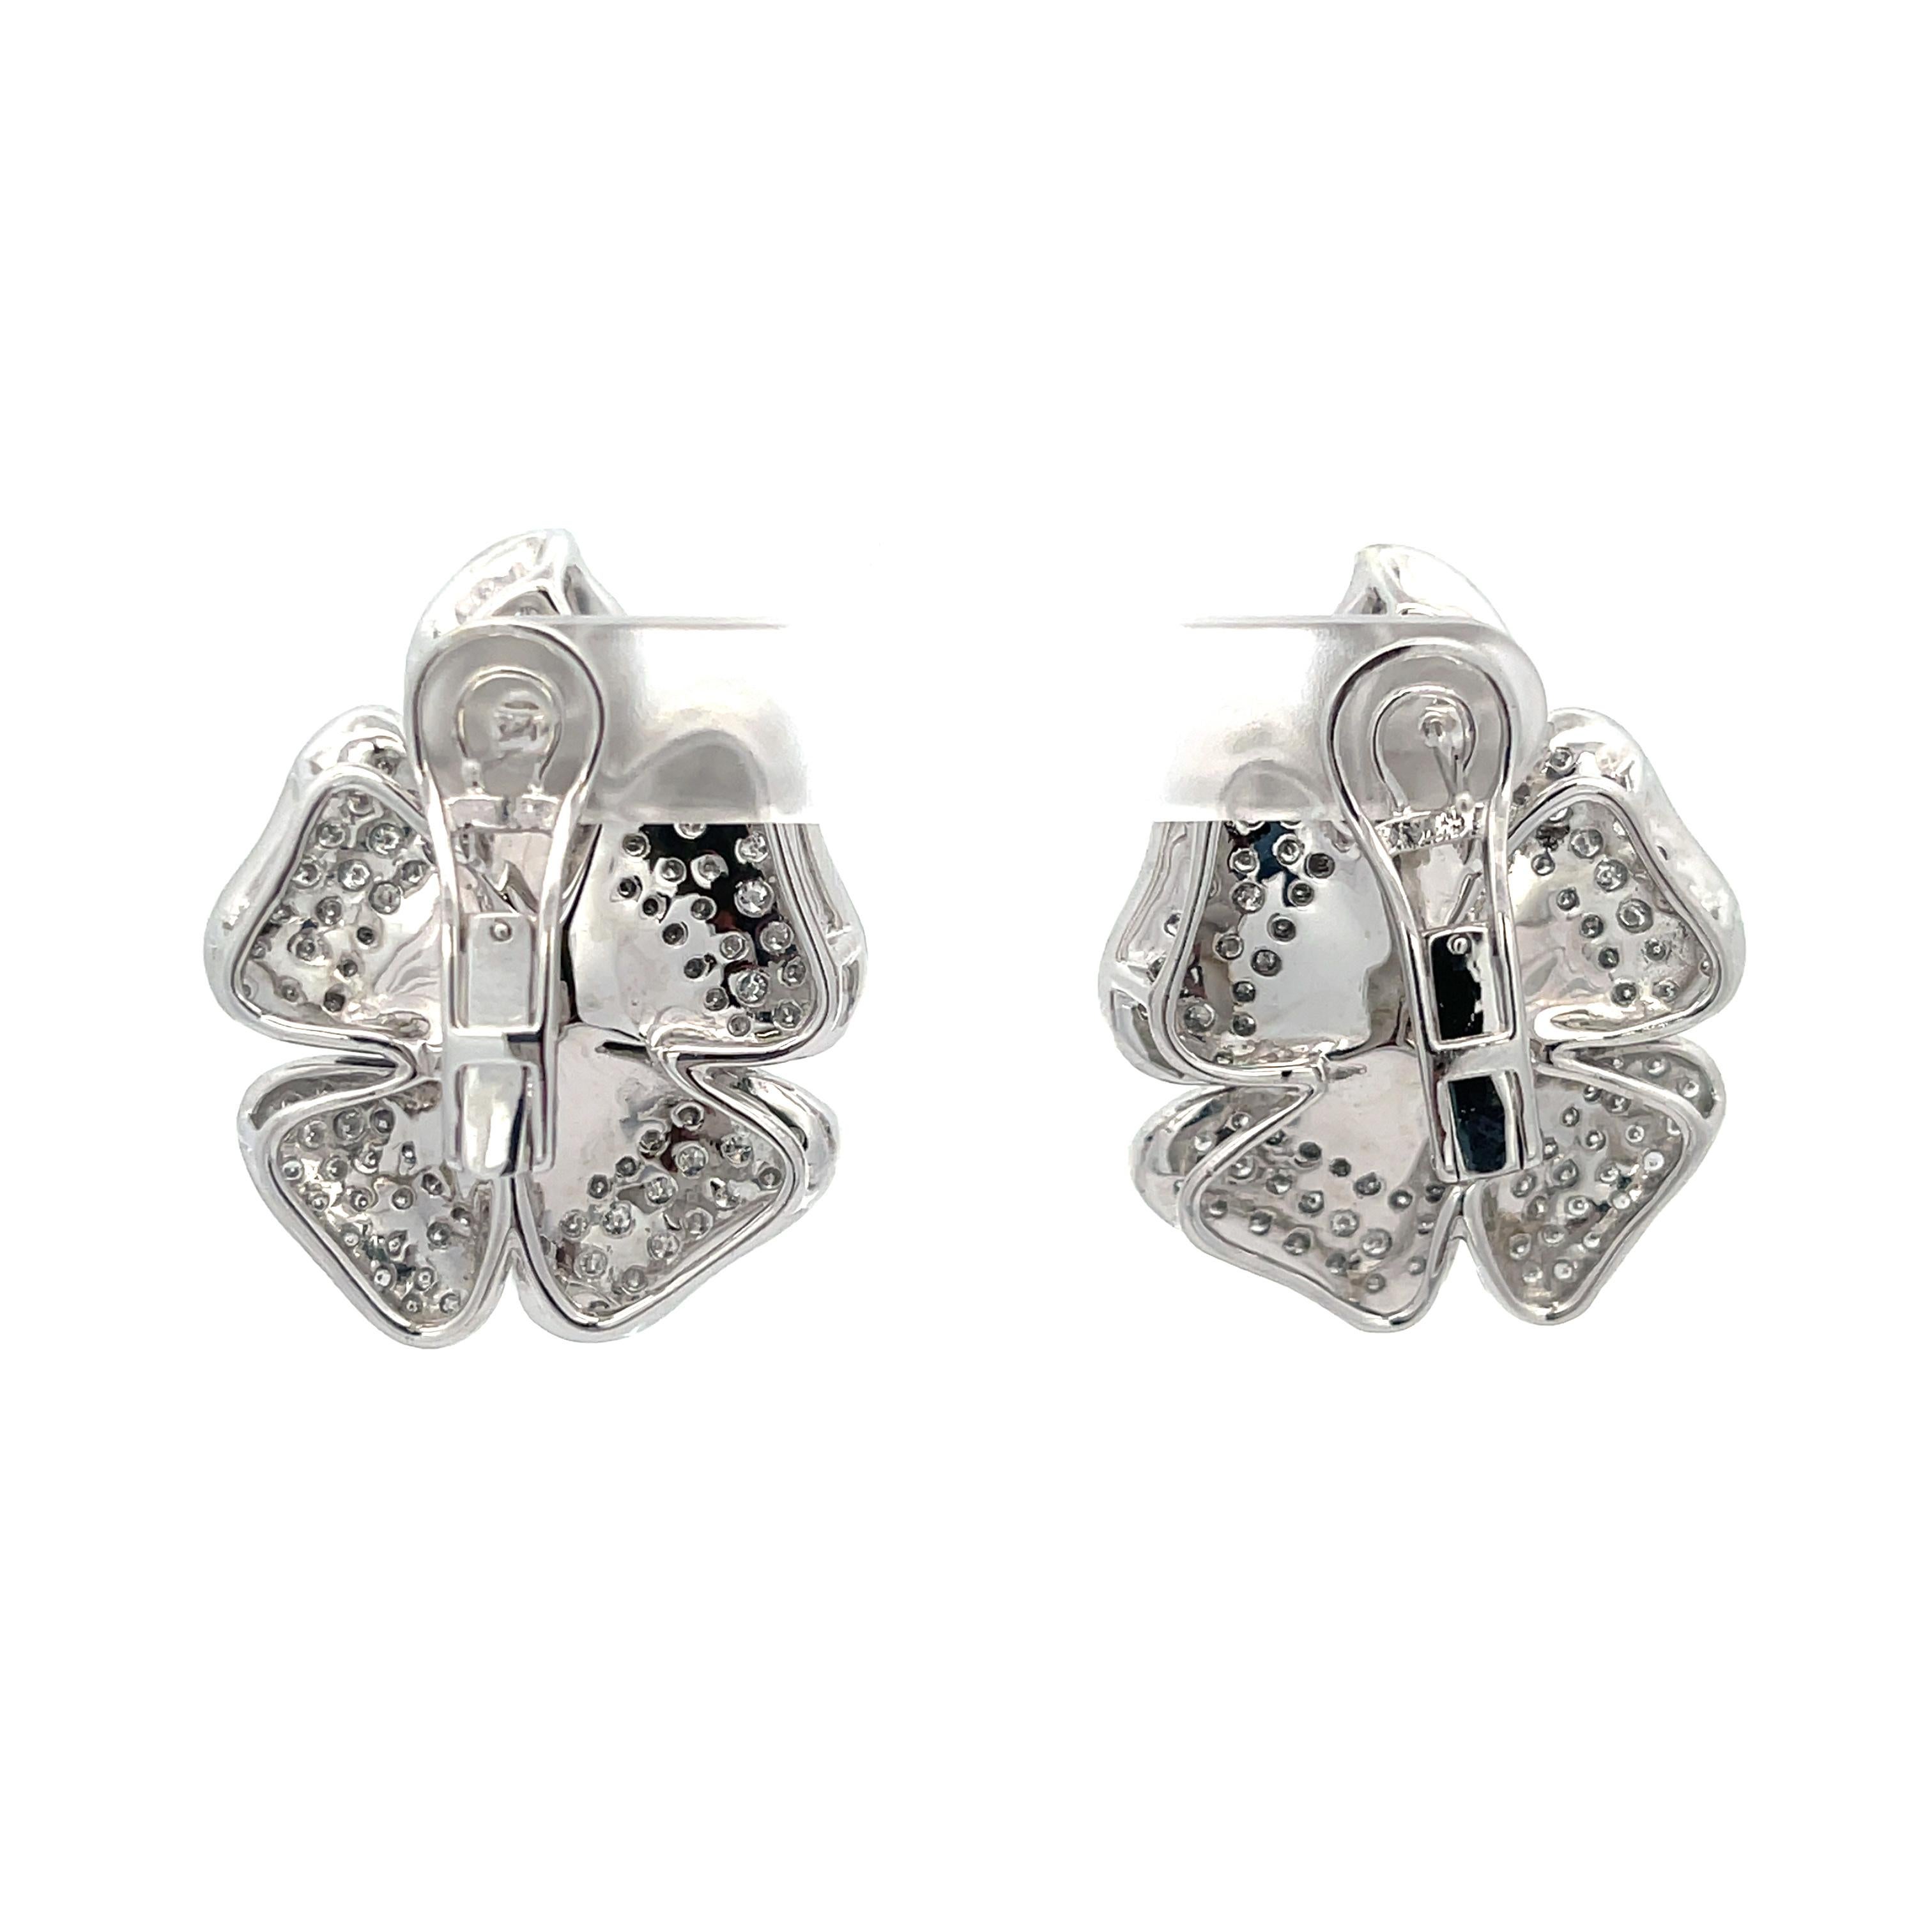 Diamond Flower Earrings in 18K White Gold. The earrings feature approximately 3.75ctw of round cut diamonds, G color, SI1-SI2 clarity. 
41.7 grams
1.5